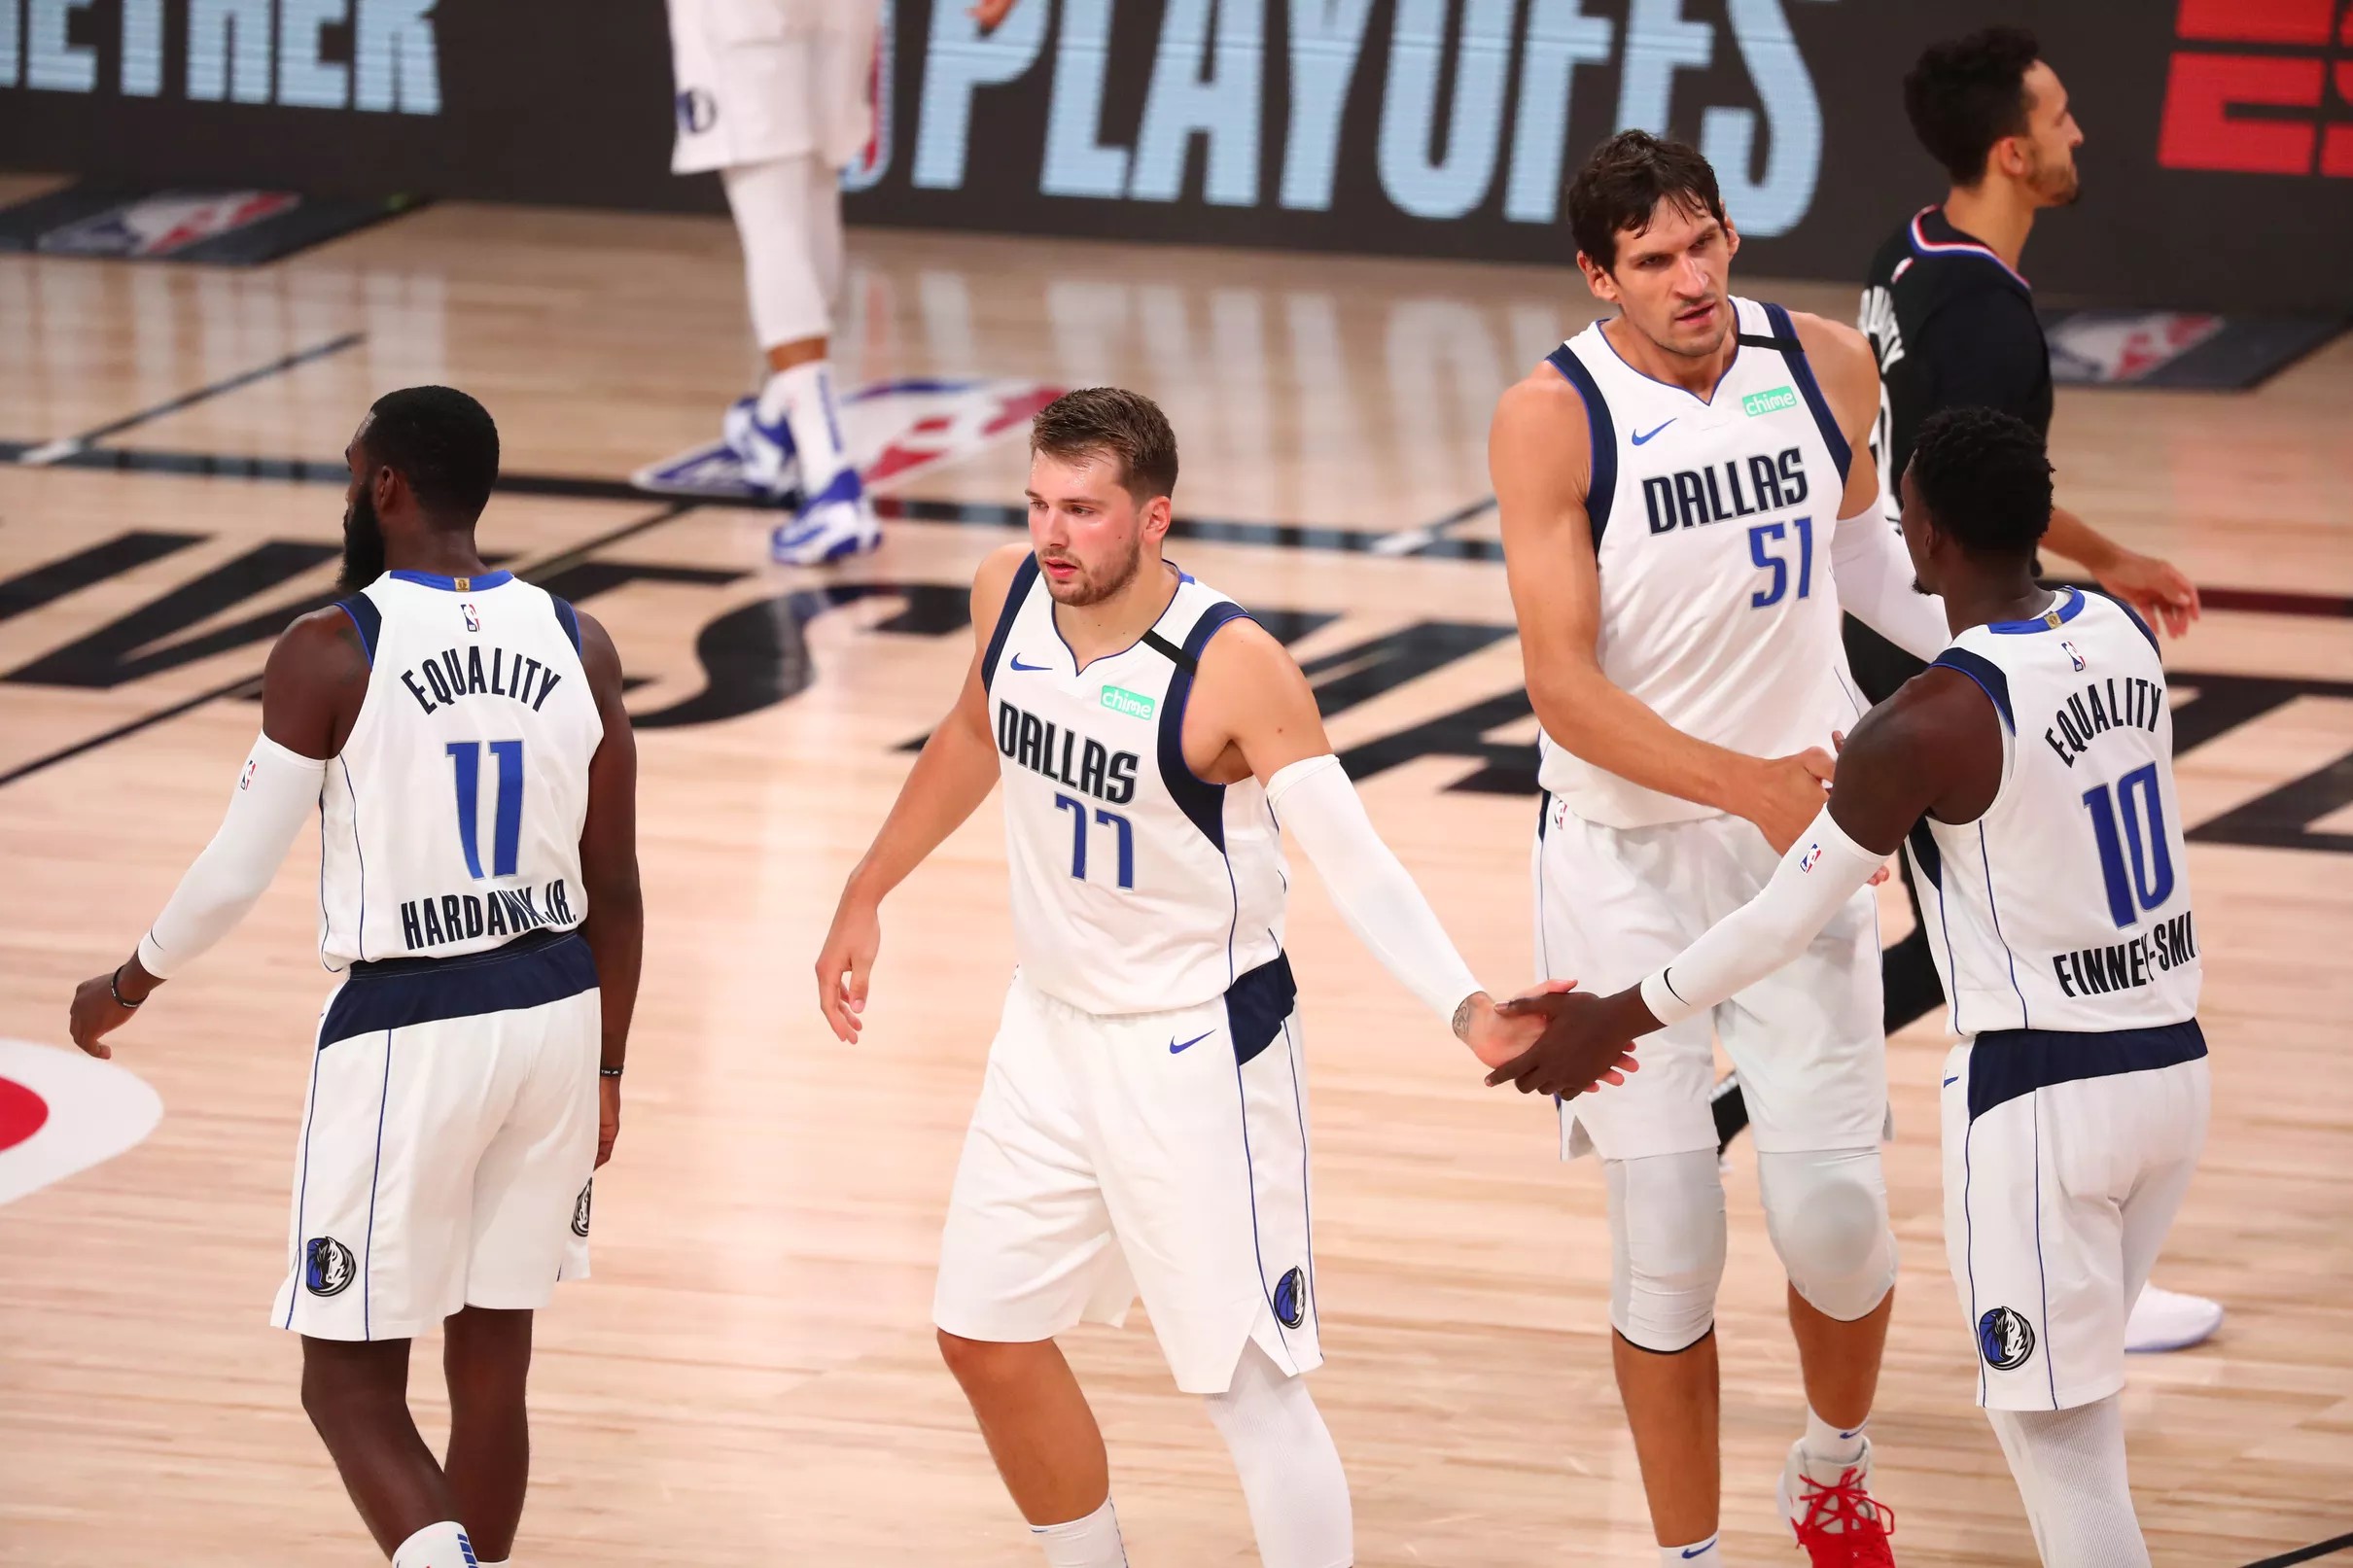 The Dallas Mavericks set the first half of their 2020-21 schedule